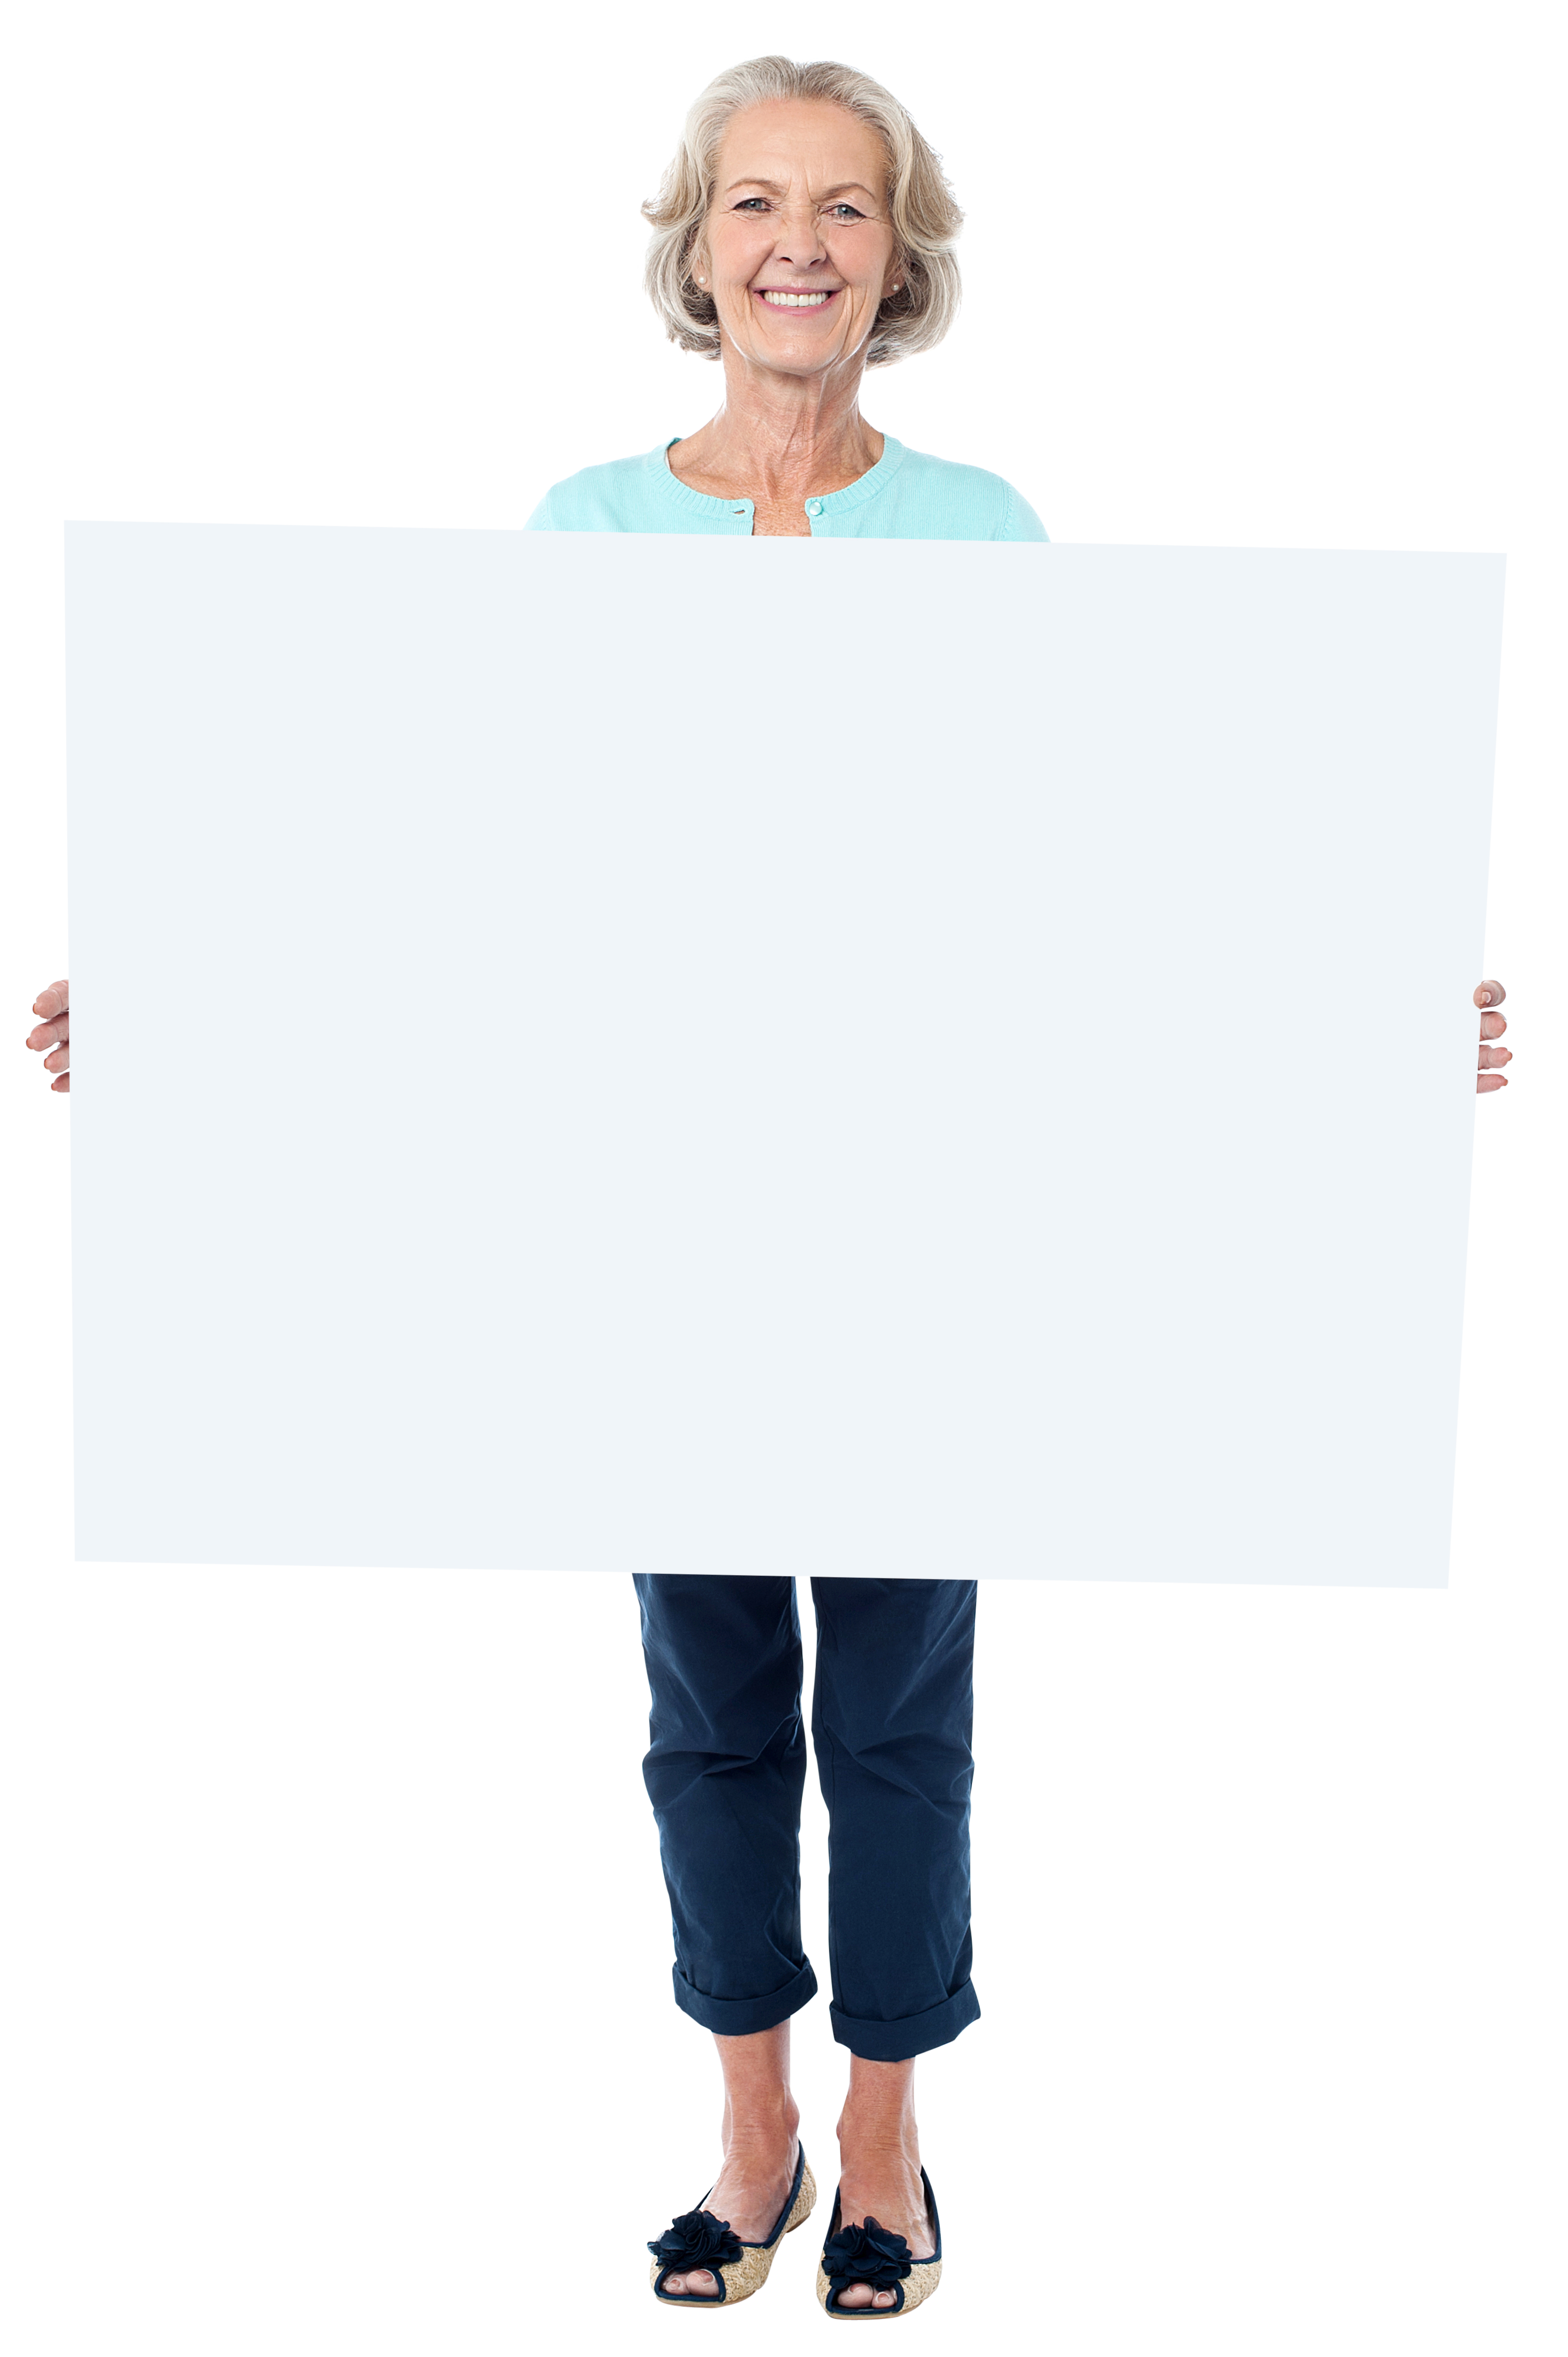 Old Women Holding Banner PNG Image